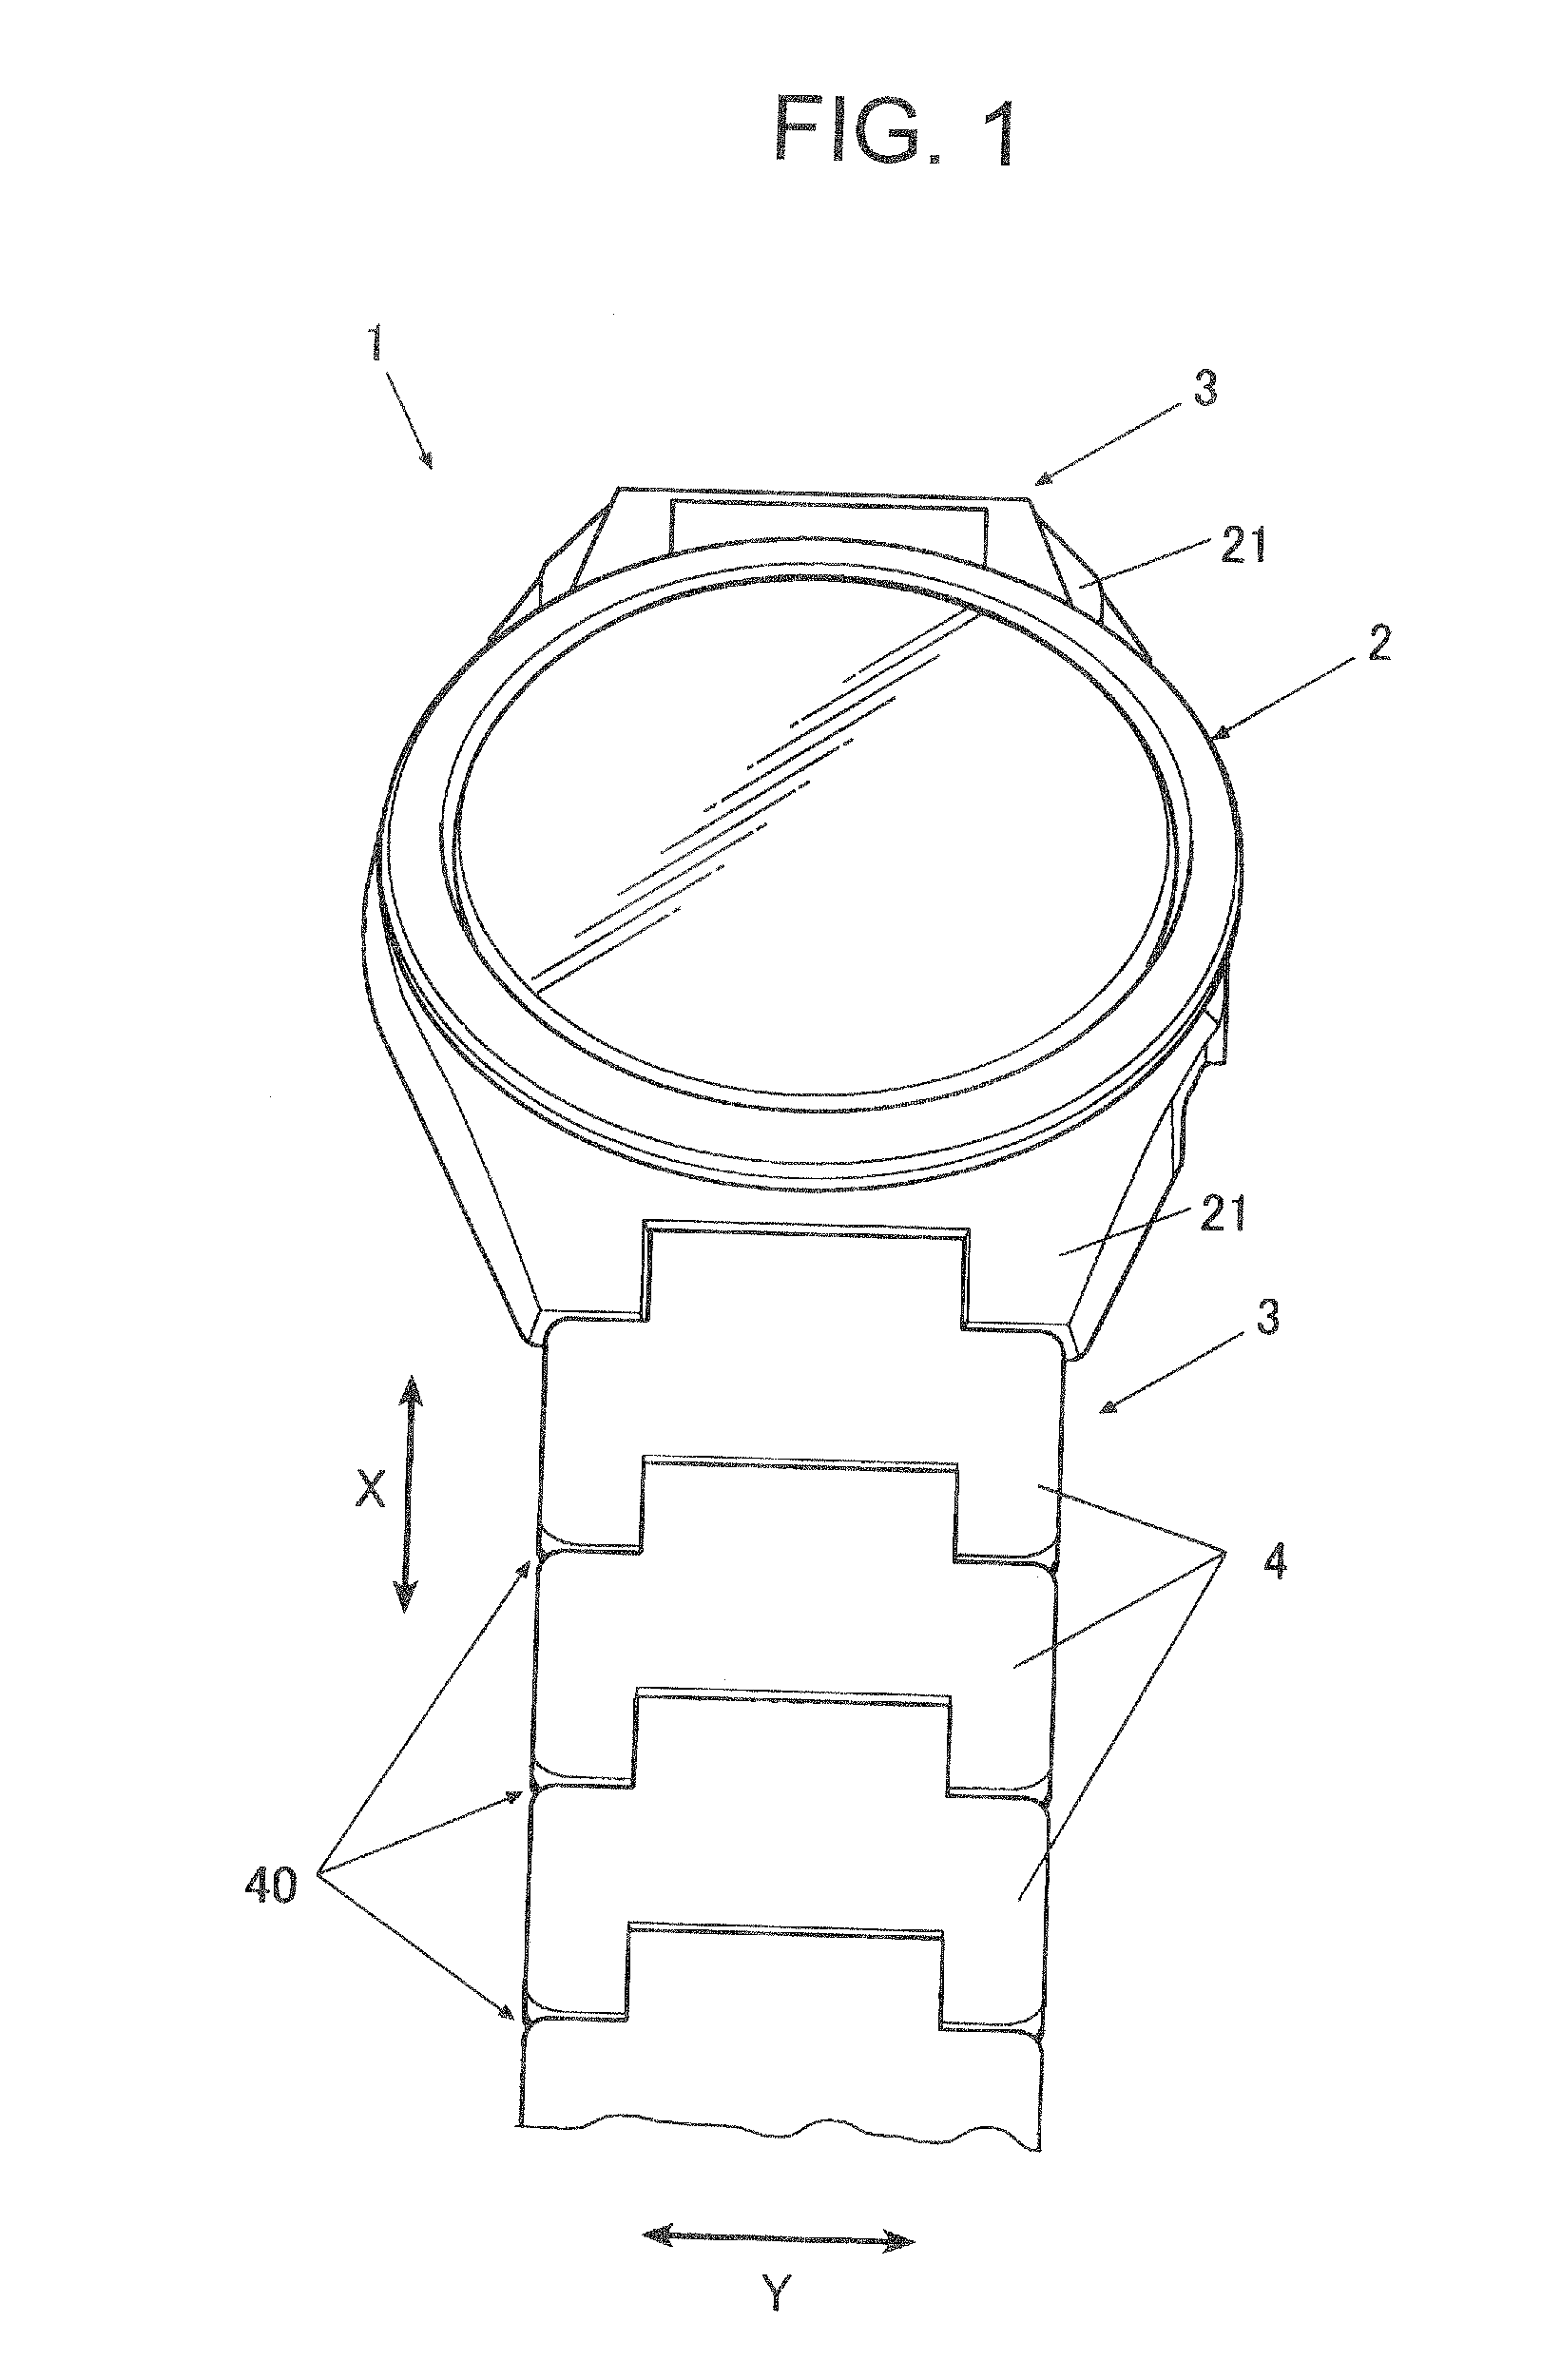 Connecting unit, band and electronic device including band